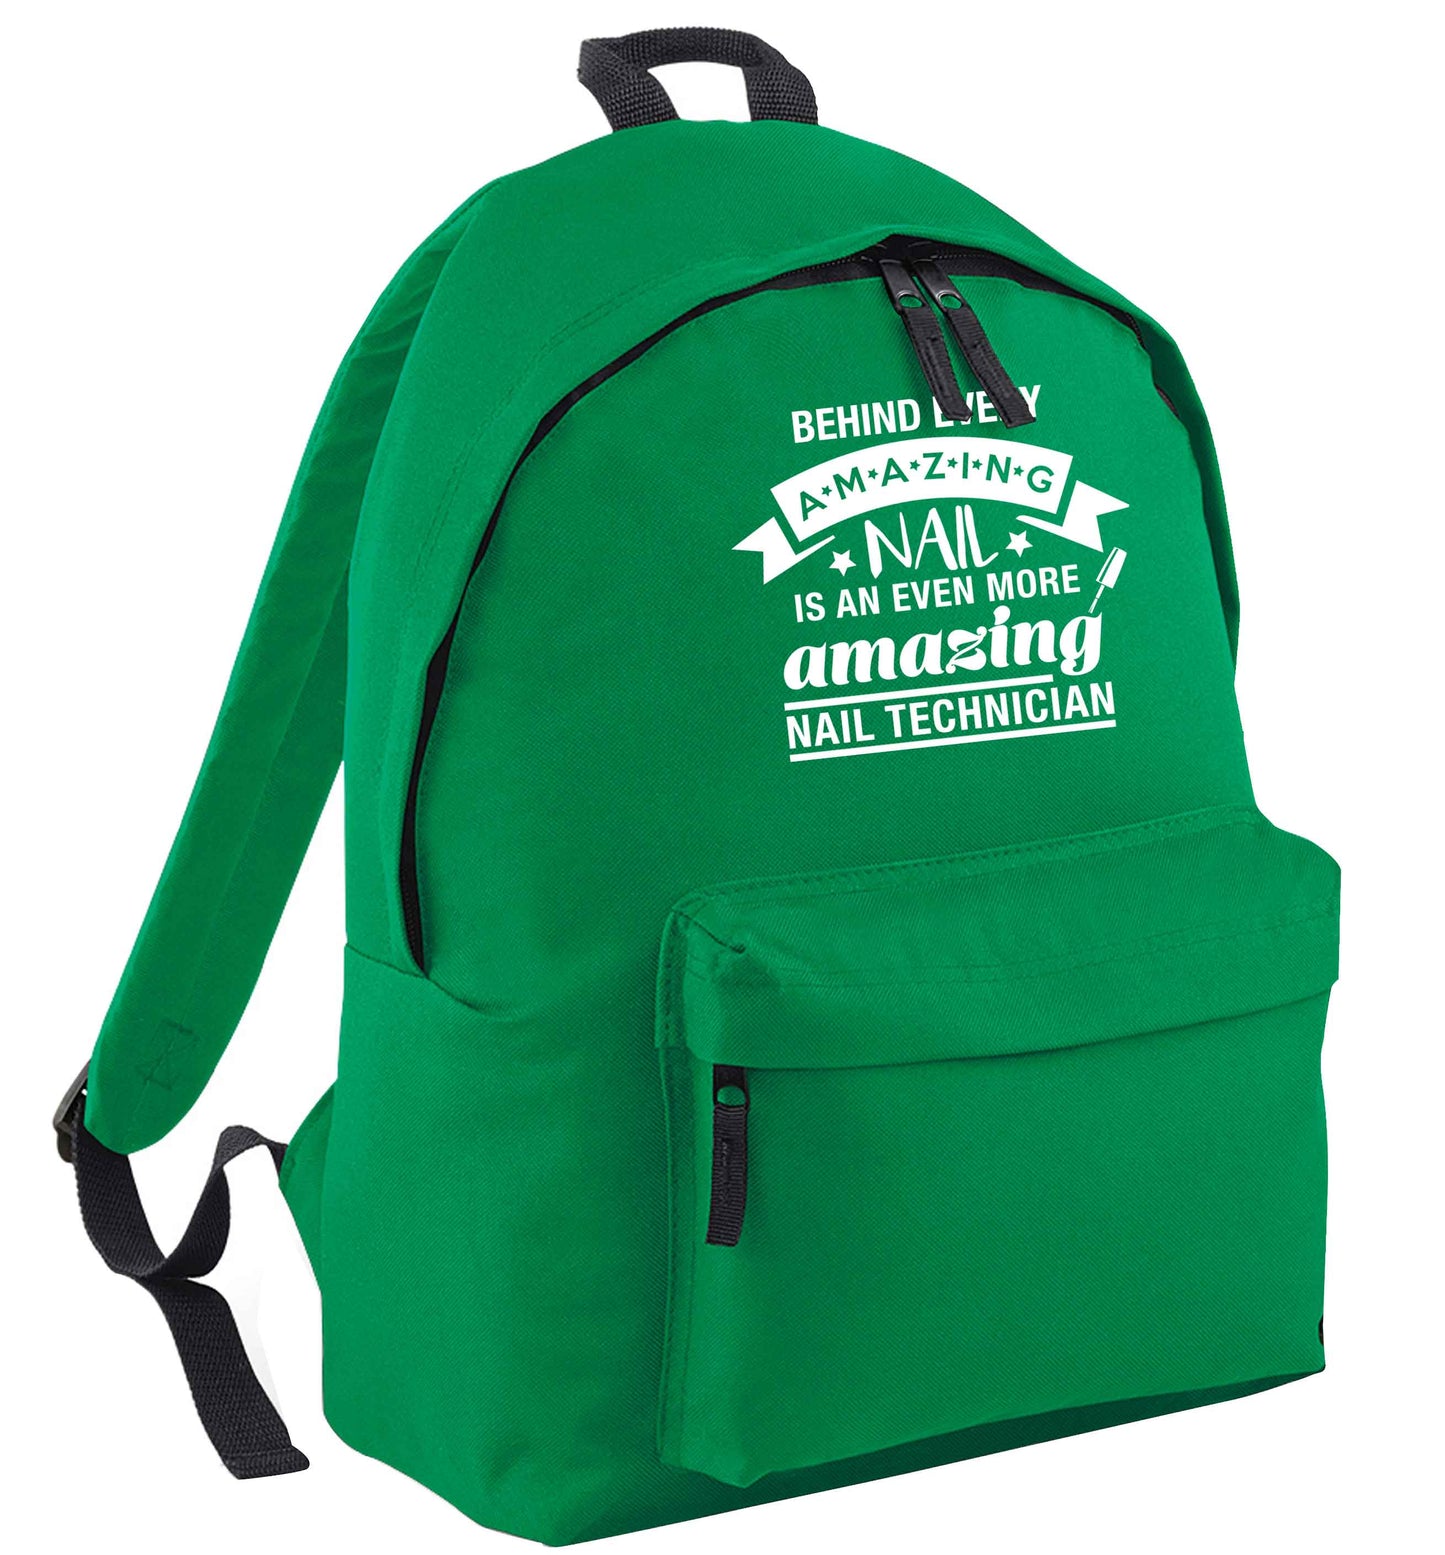 Behind every amazing nail is an even more amazing nail technician green adults backpack